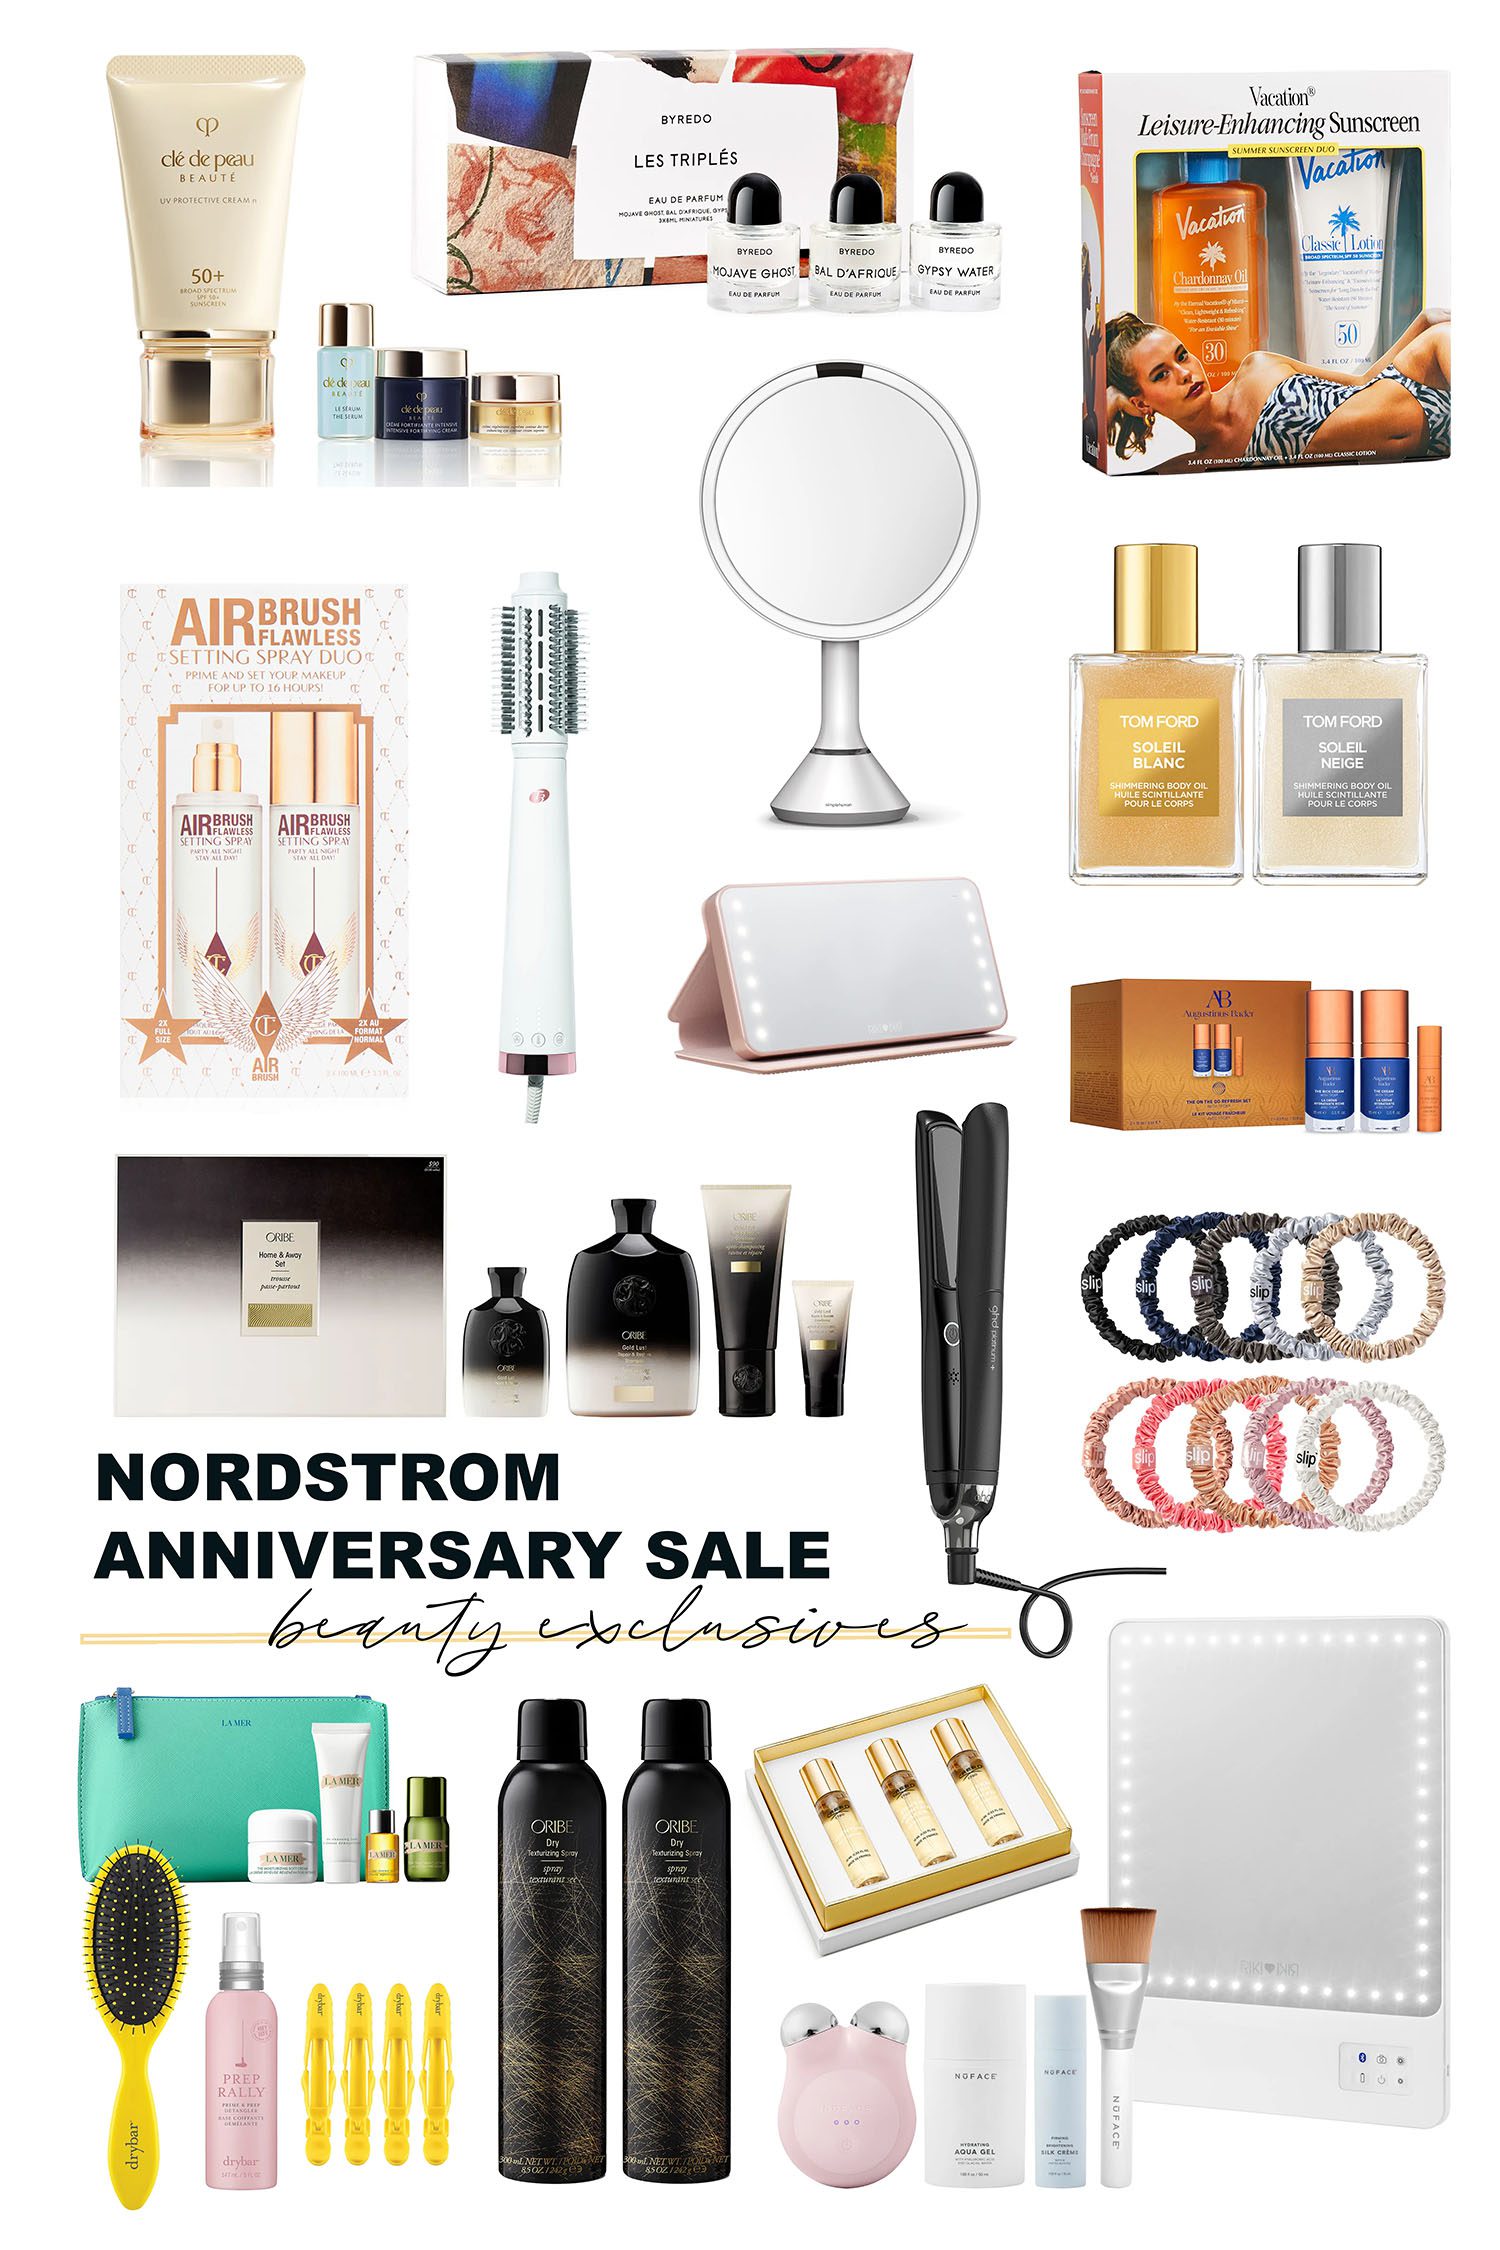 Nordstrom Anniversary Sale Picks + $1,500 Giveaway! - Southern